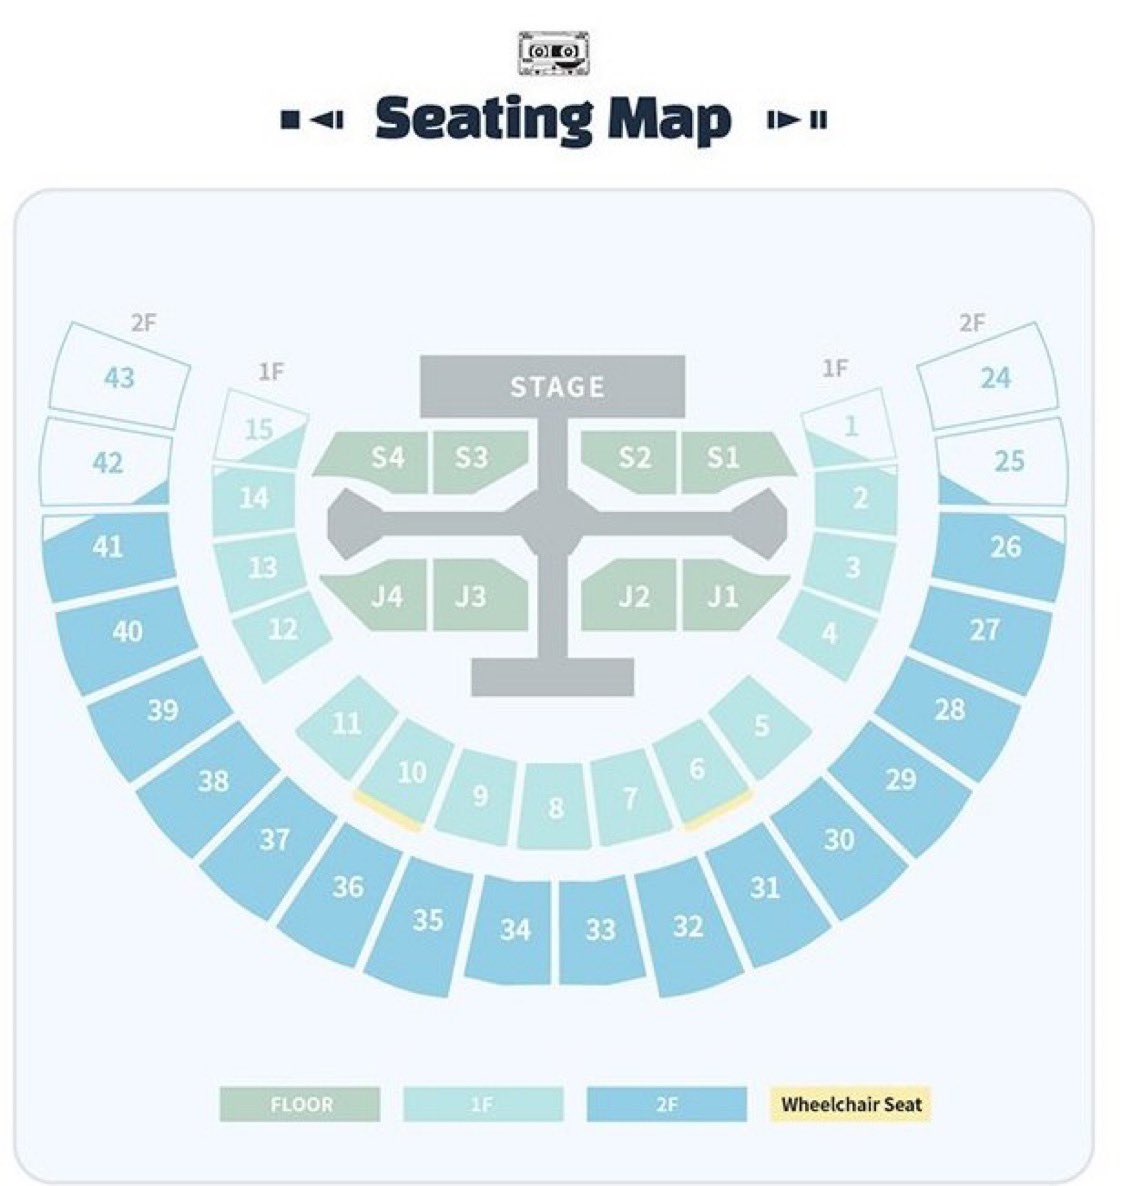 WTS Open Reservation 양도 代刷 2024 SUPER JUNIOR <SUPER SHOW SPIN-OFF : Halftime> in SEOUL📍

📅 2024.06.22(SAT) 7PM
📅 2024.06.23(SUN) 4PM 

Floor Seat✅
Transfer✅

DM IF INTERESTED 📨
line.me/ti/p/5Zdfk54iLE

#SuperShow_Spinoff_Halftime #SSS_HALFTIME
#슈퍼주니어 #SUPERJUNIOR